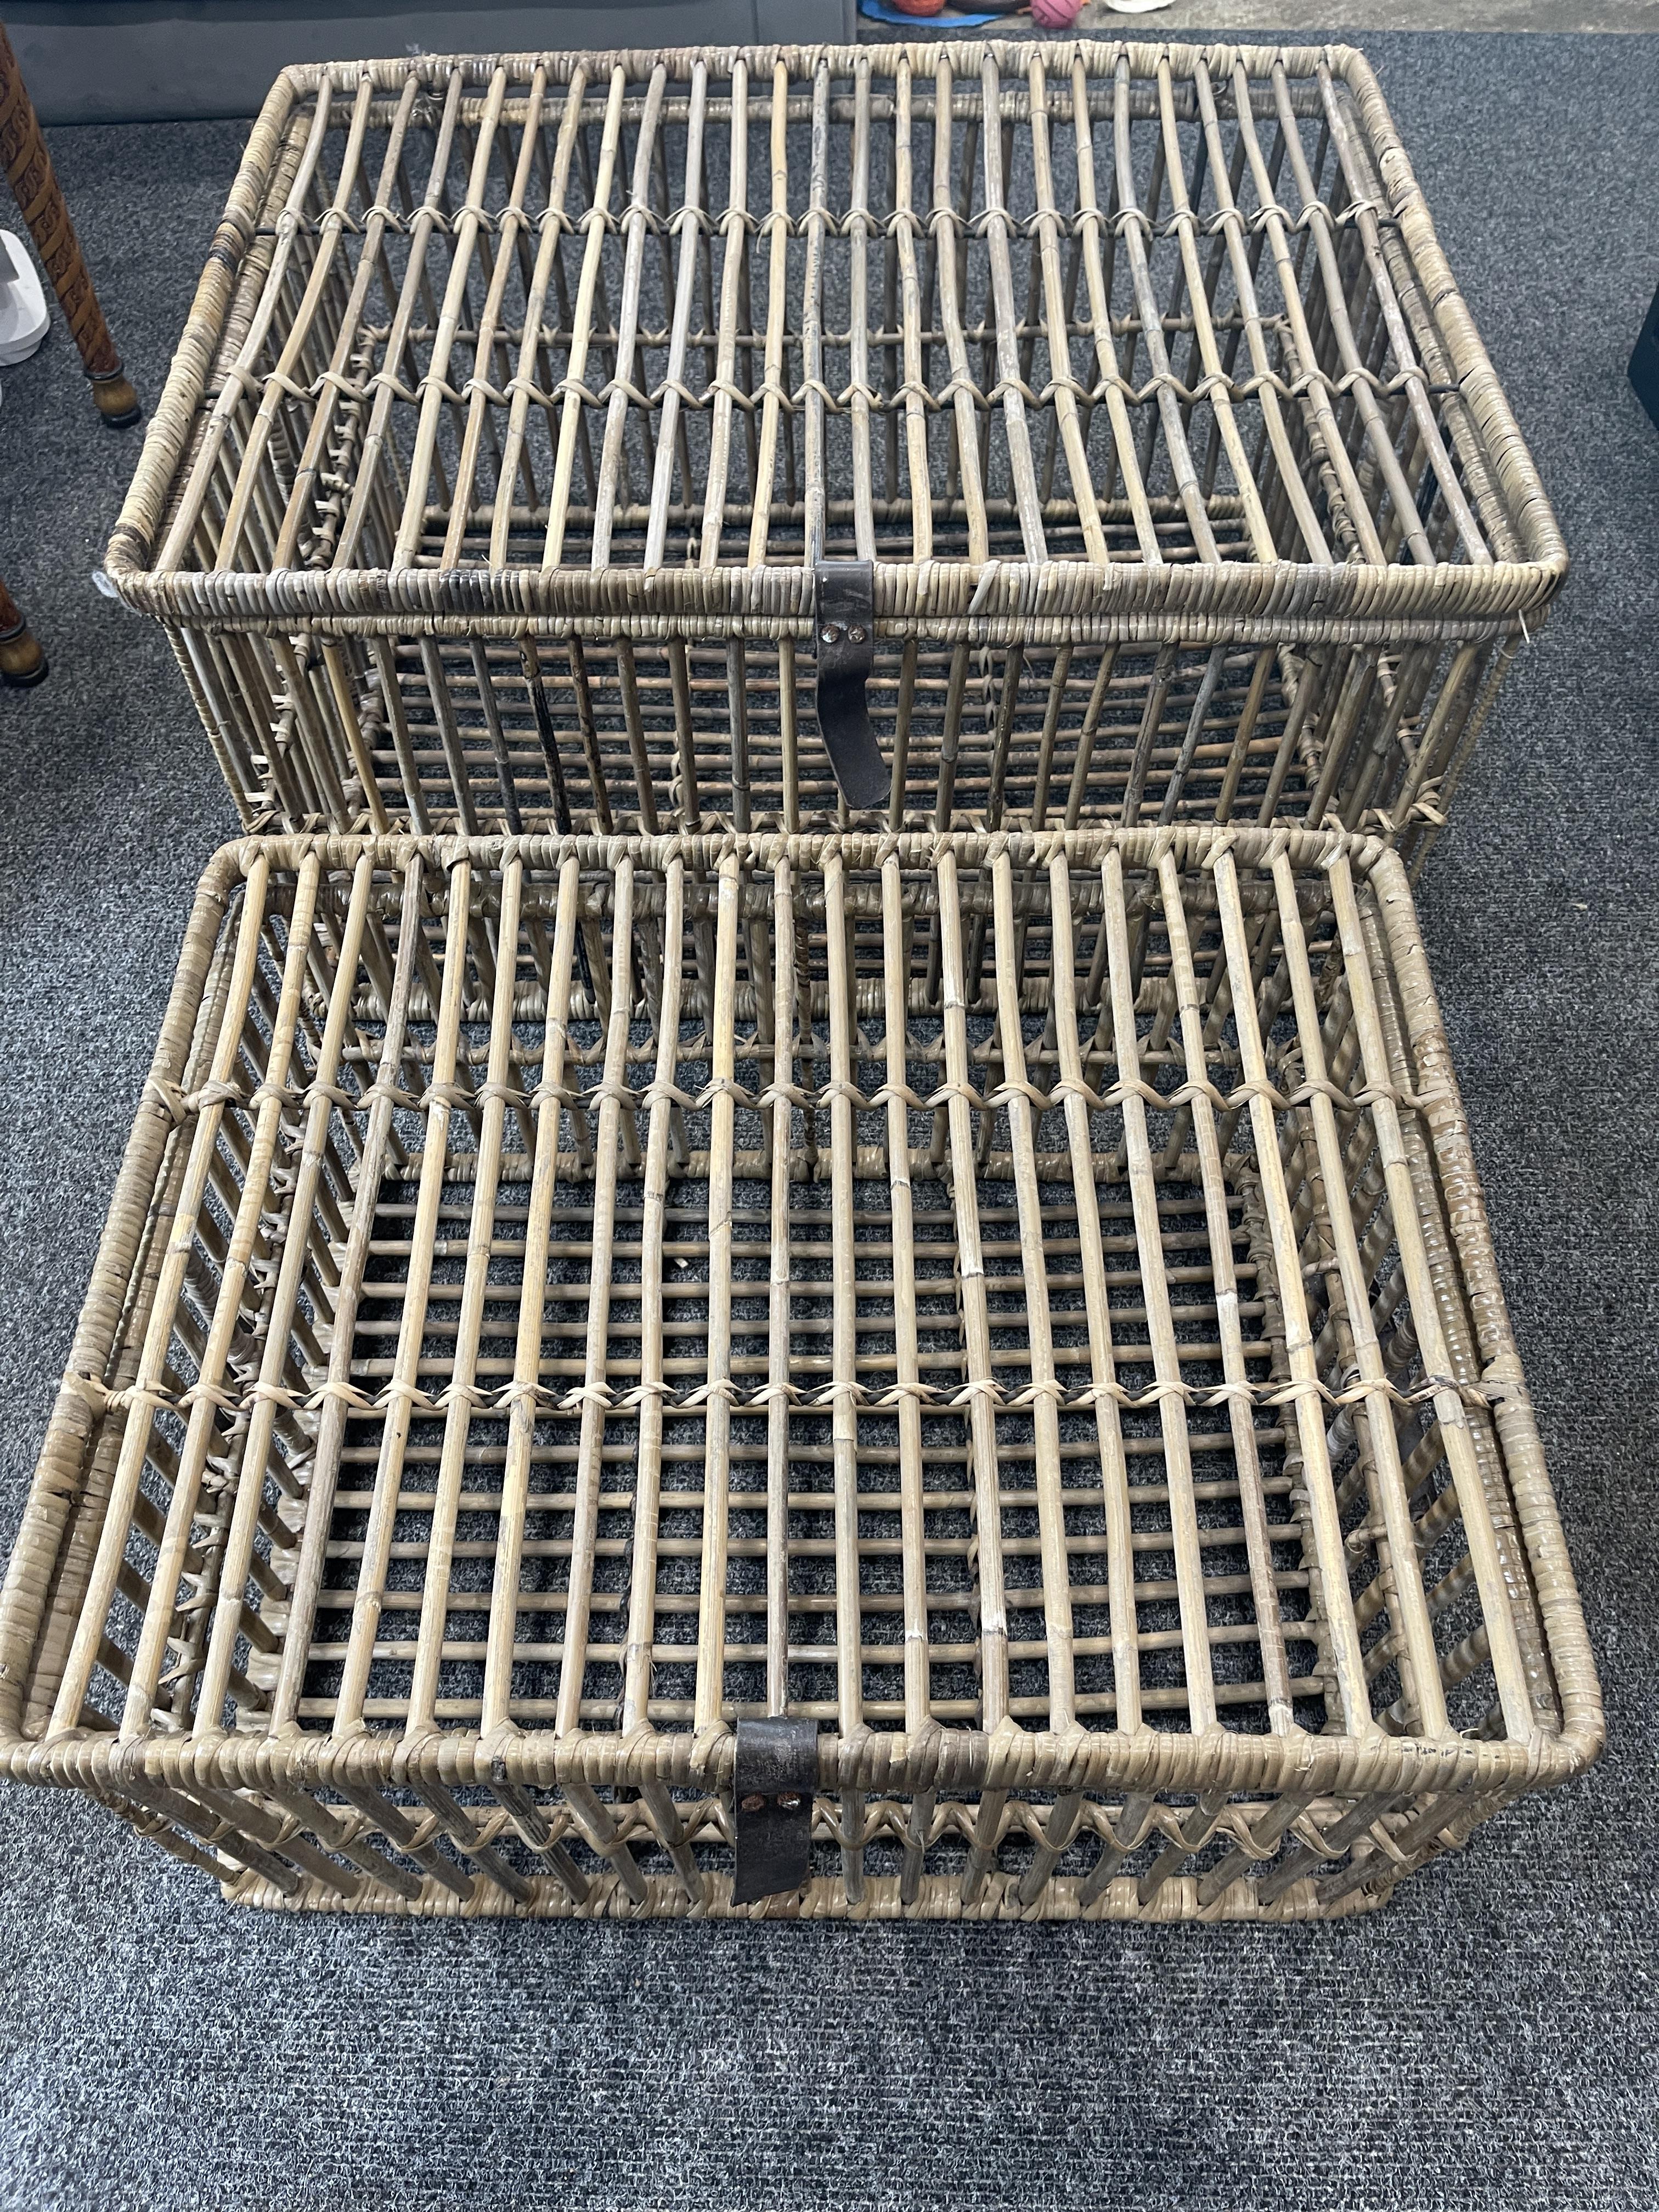 Two Large Vintage Rattan Trunks. - Image 5 of 10